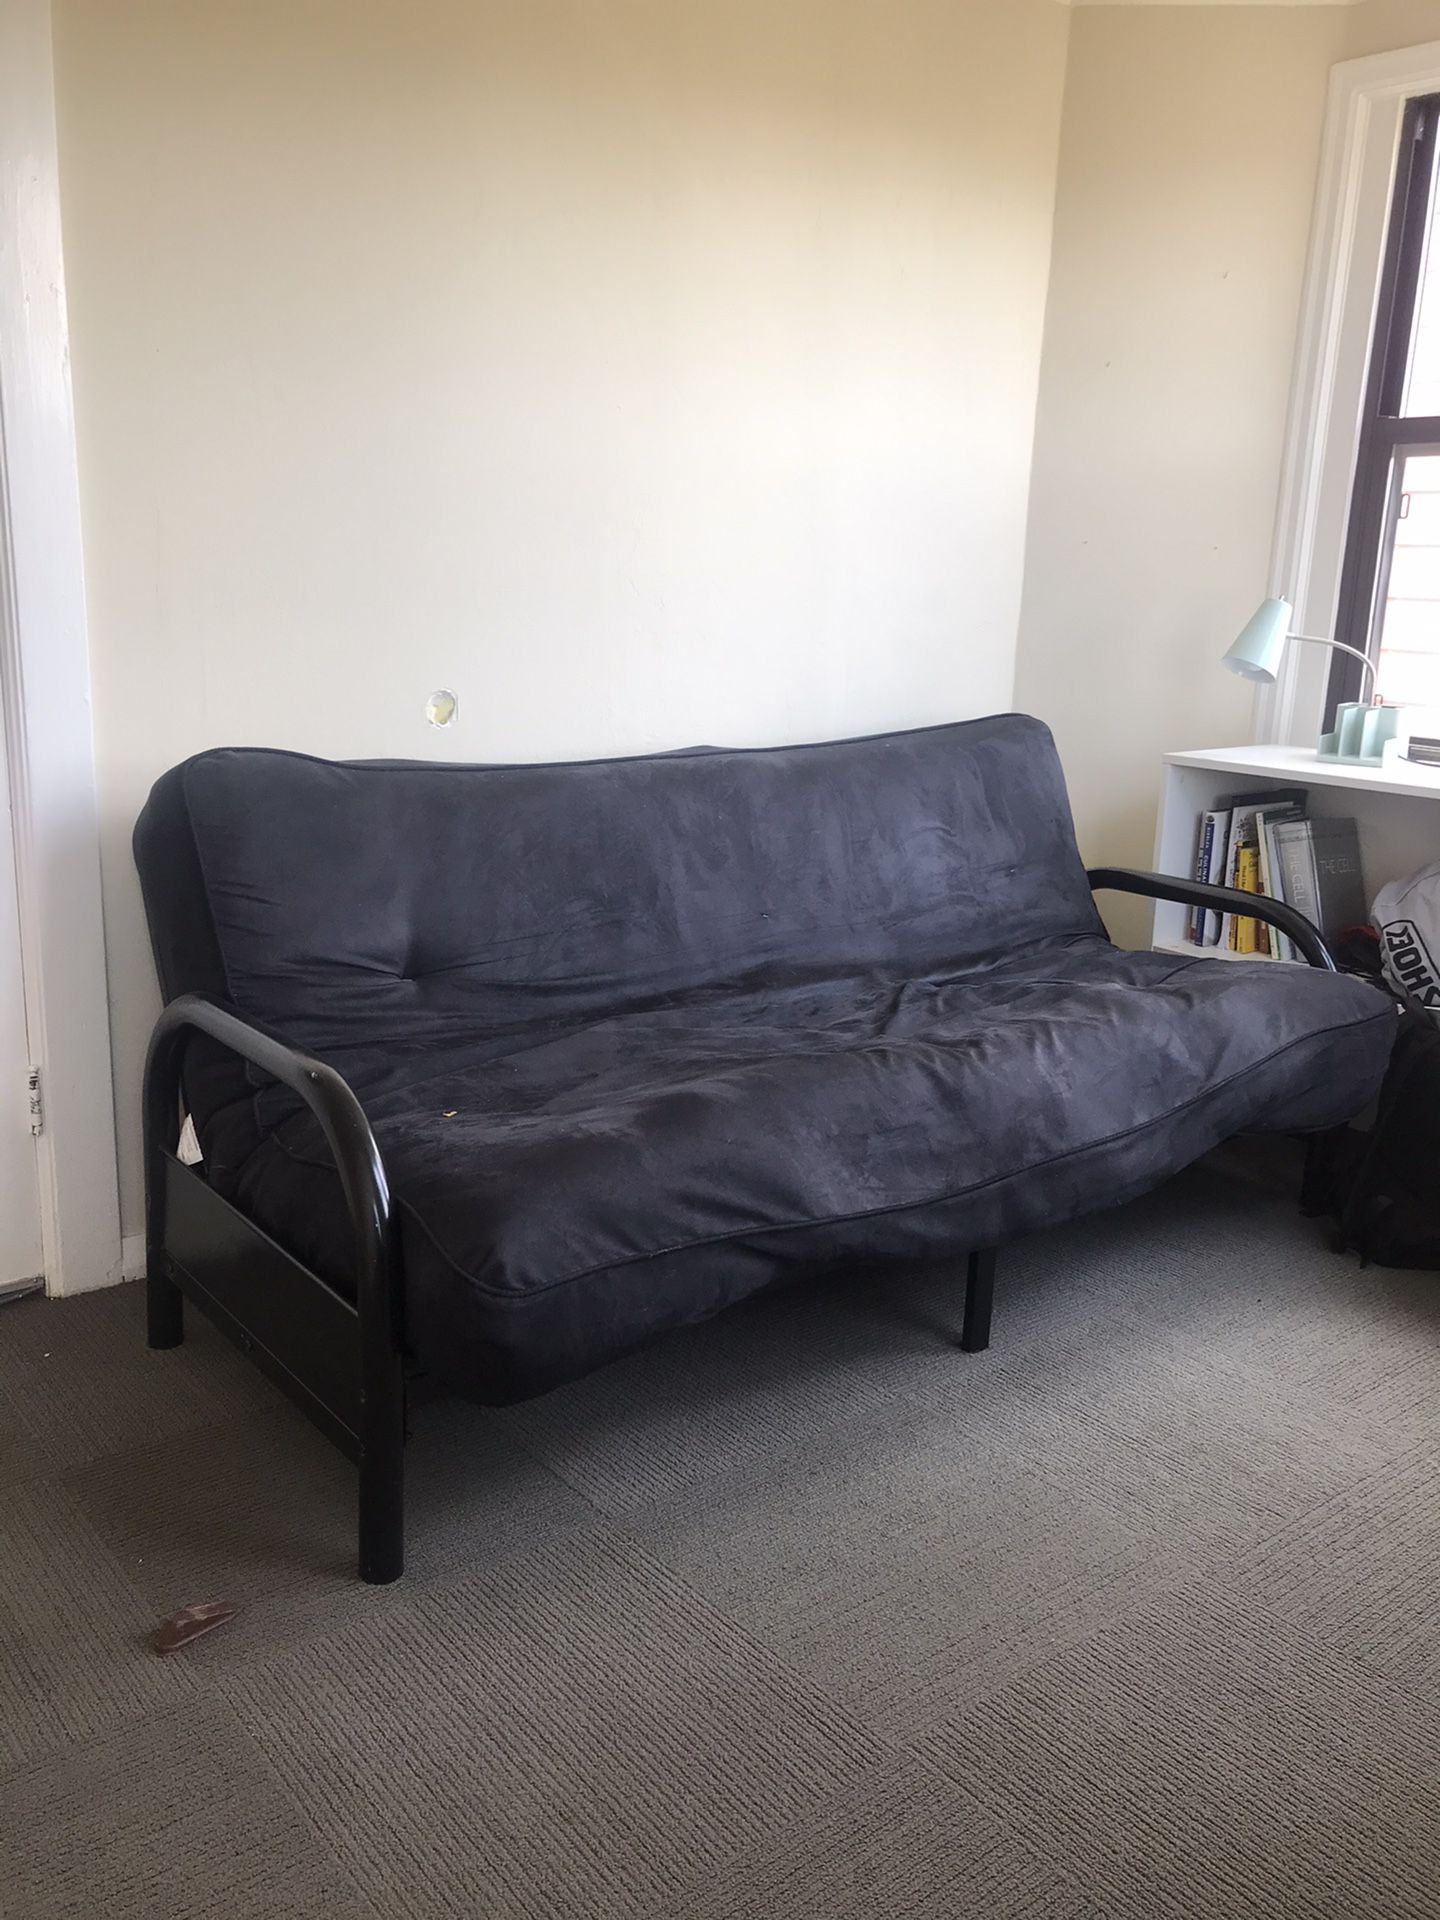 Futon bed and couch